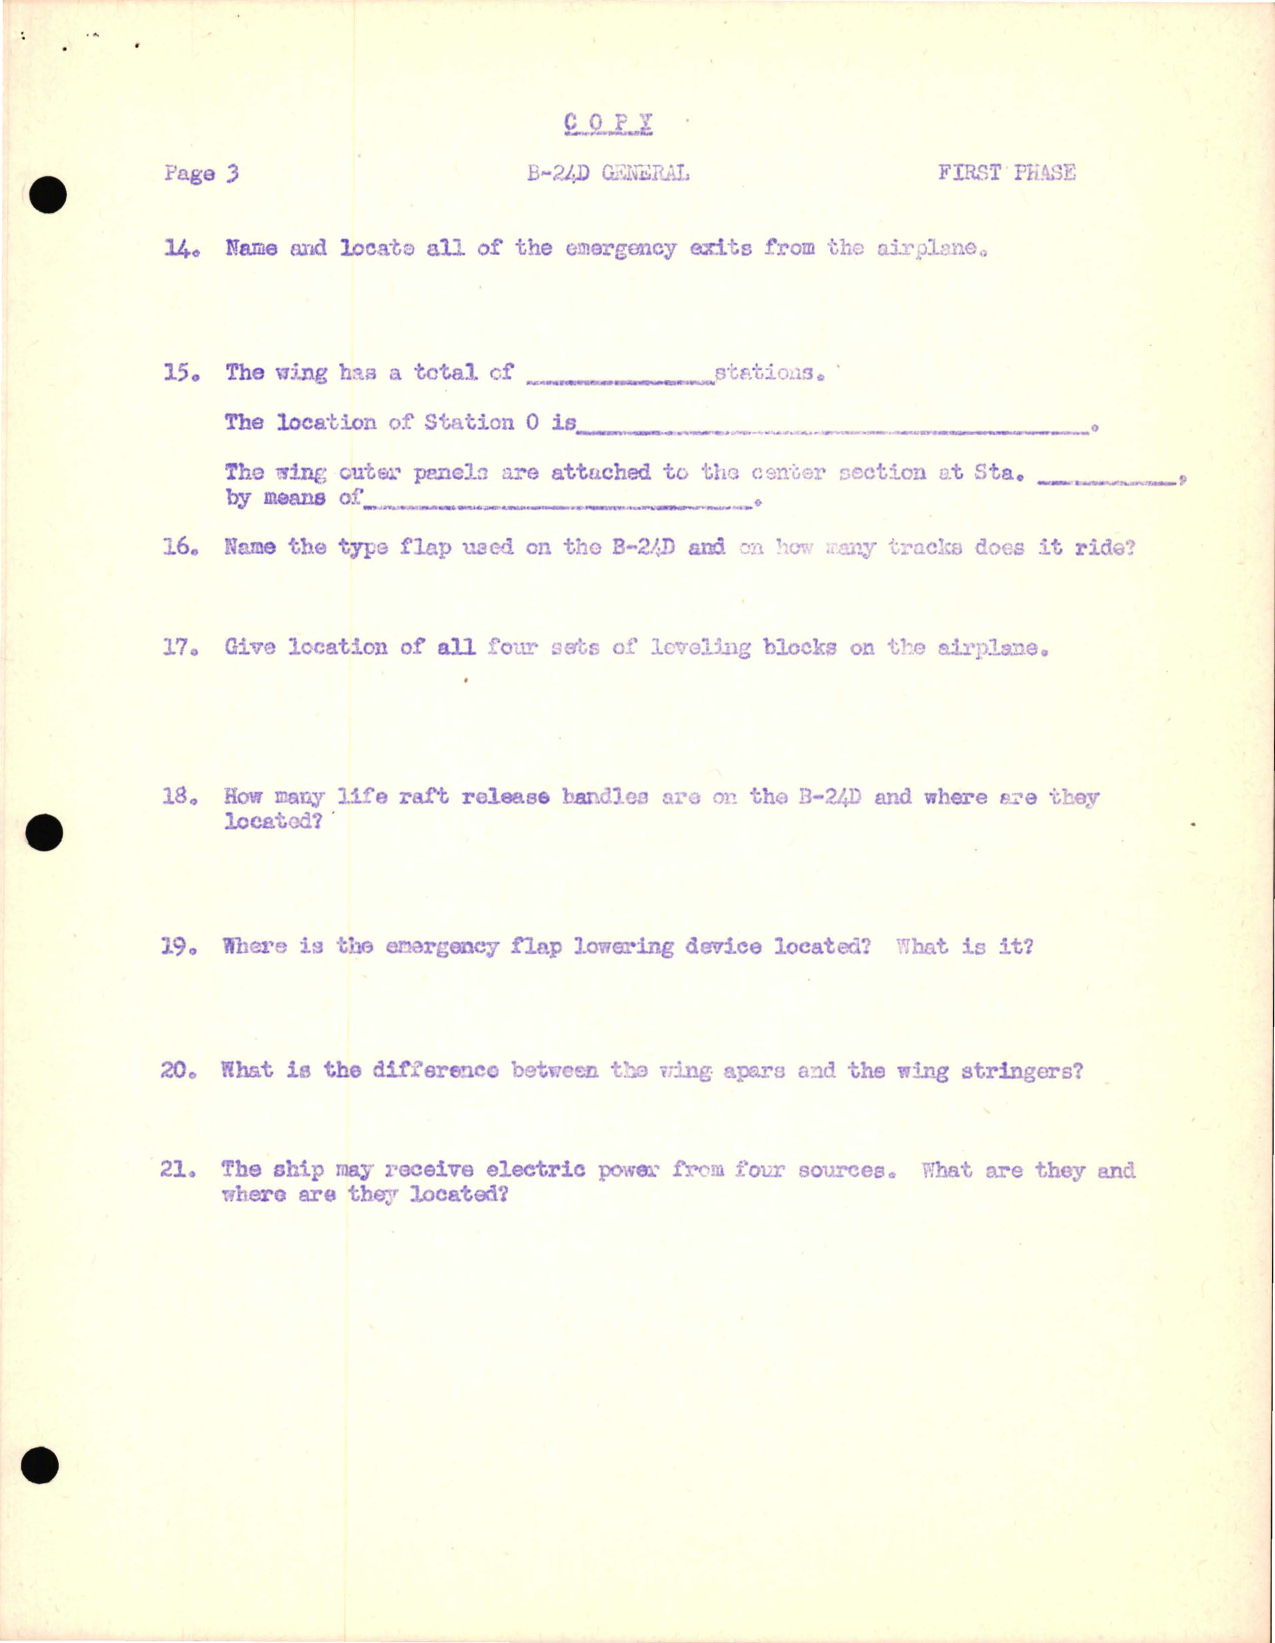 Sample page 5 from AirCorps Library document: Study Guide for B-24D and Cockpits and Cabins for Consolidated Aircraft, First Phase